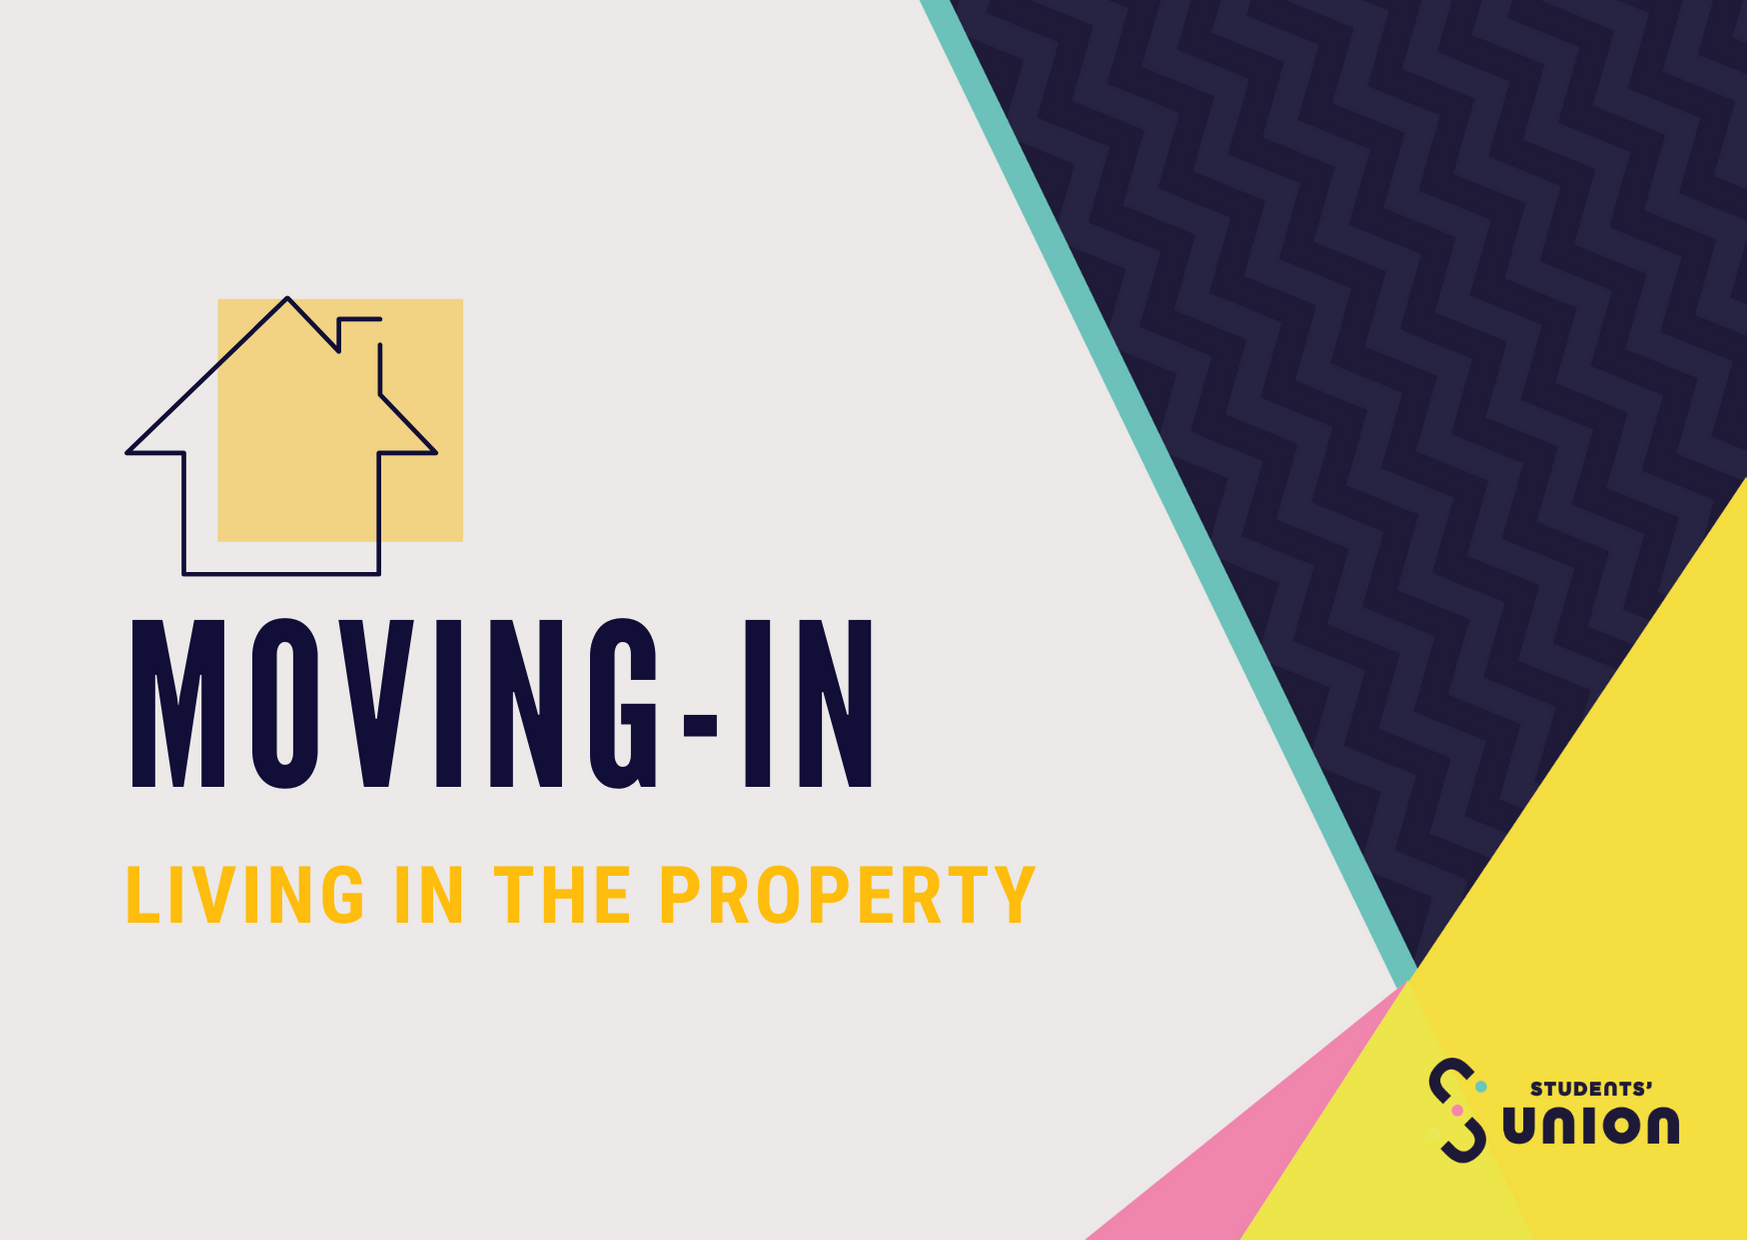 Moving-in Guide: Living in the Property